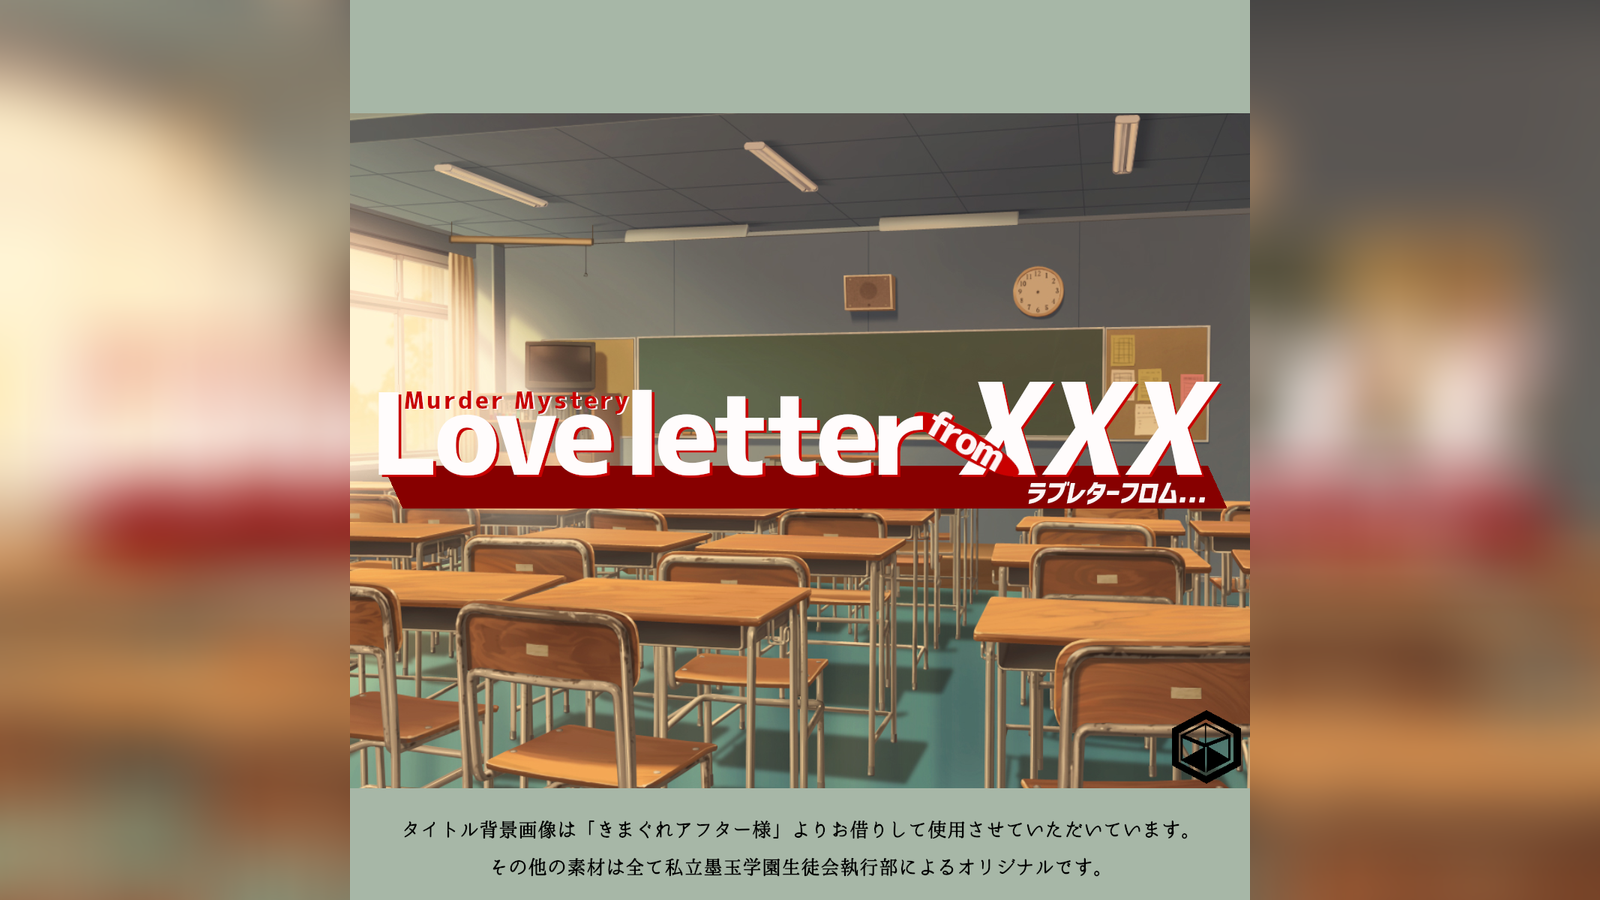 Love letter from XXX